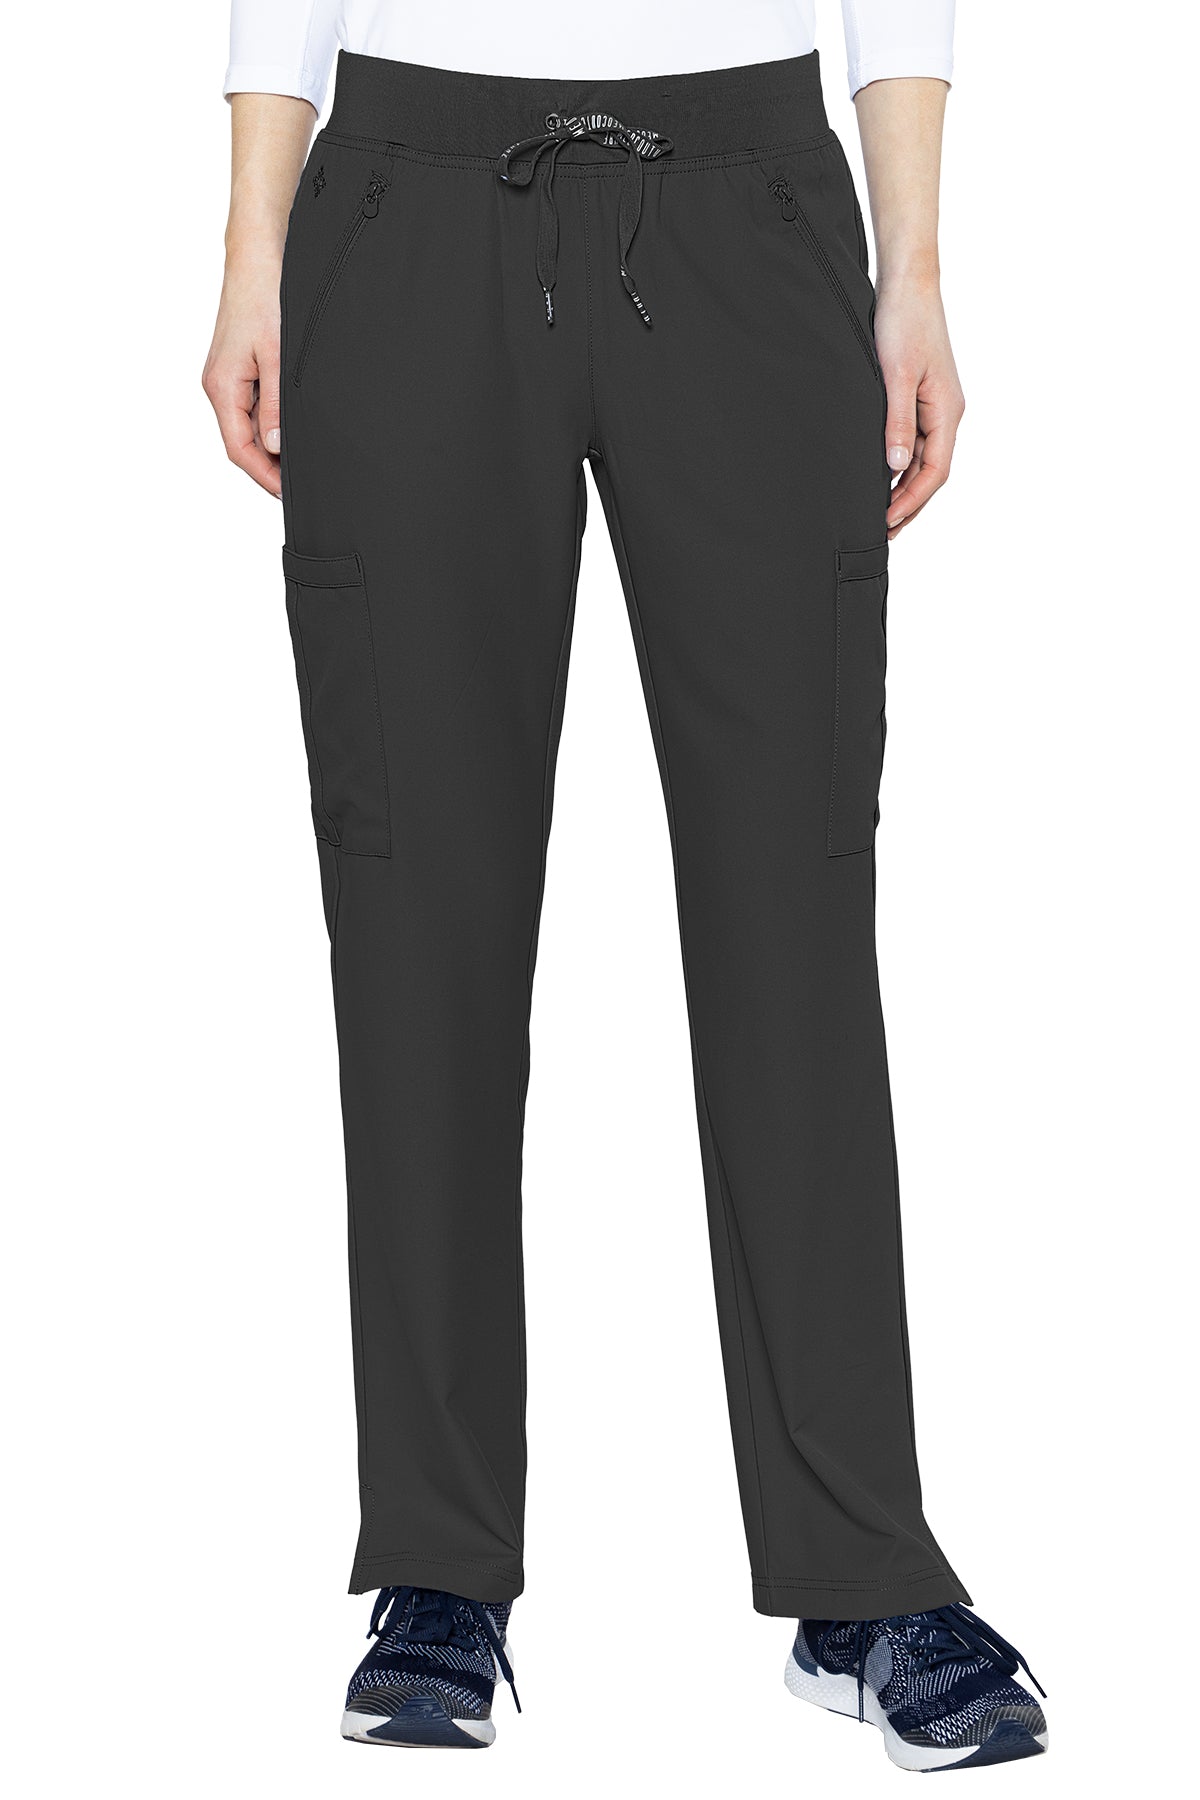 Zipper Pant Lightweight by Med Couture (Tall) XS-5XL / Black